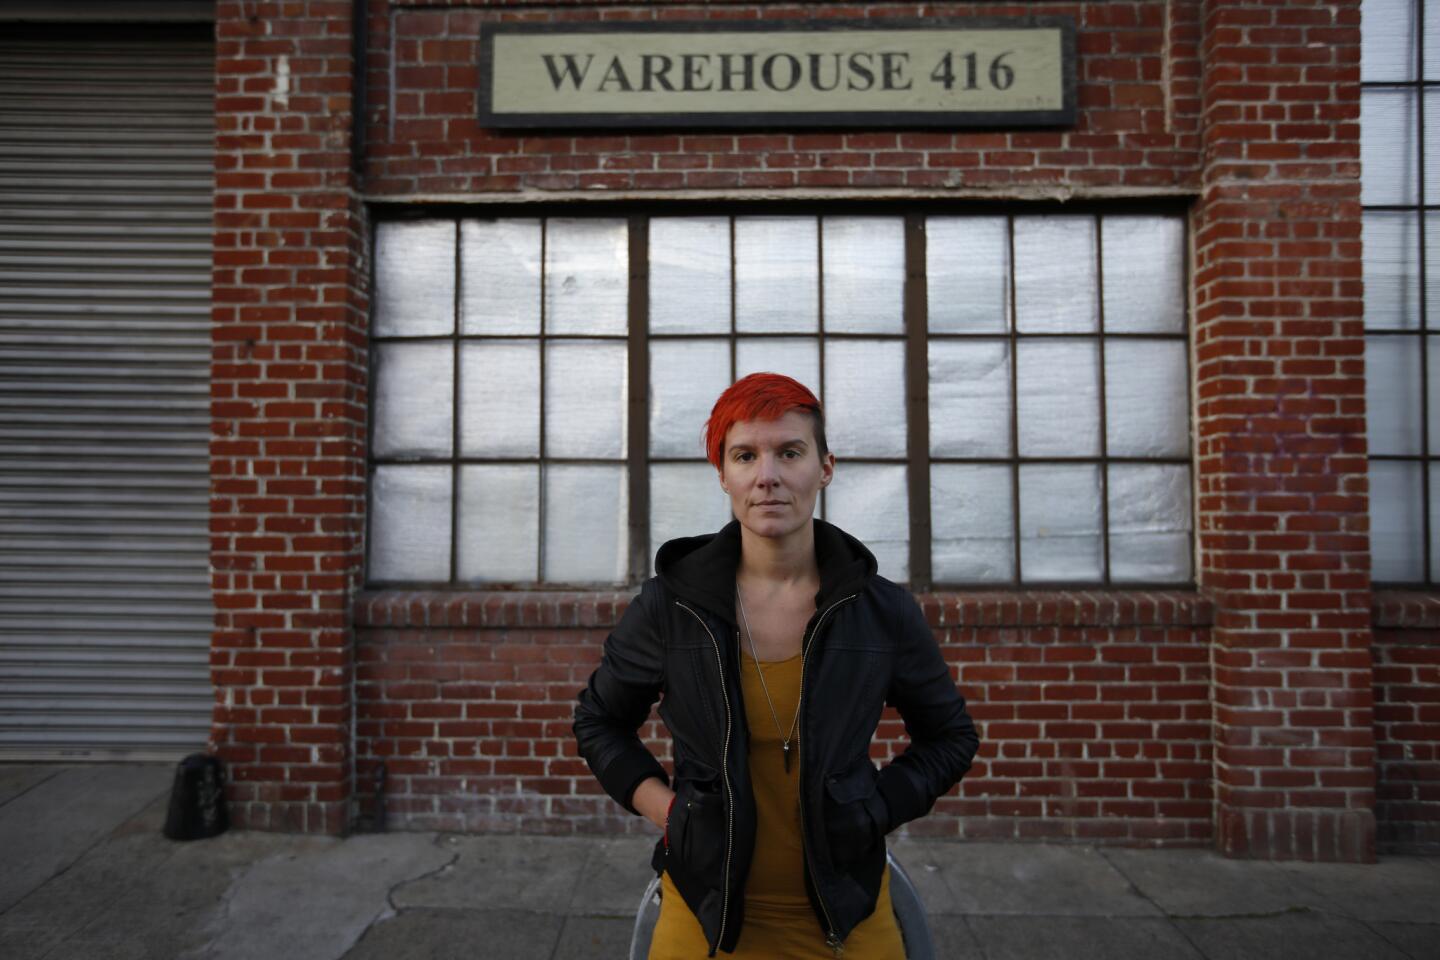 Warehouse resident must leave after 10 years